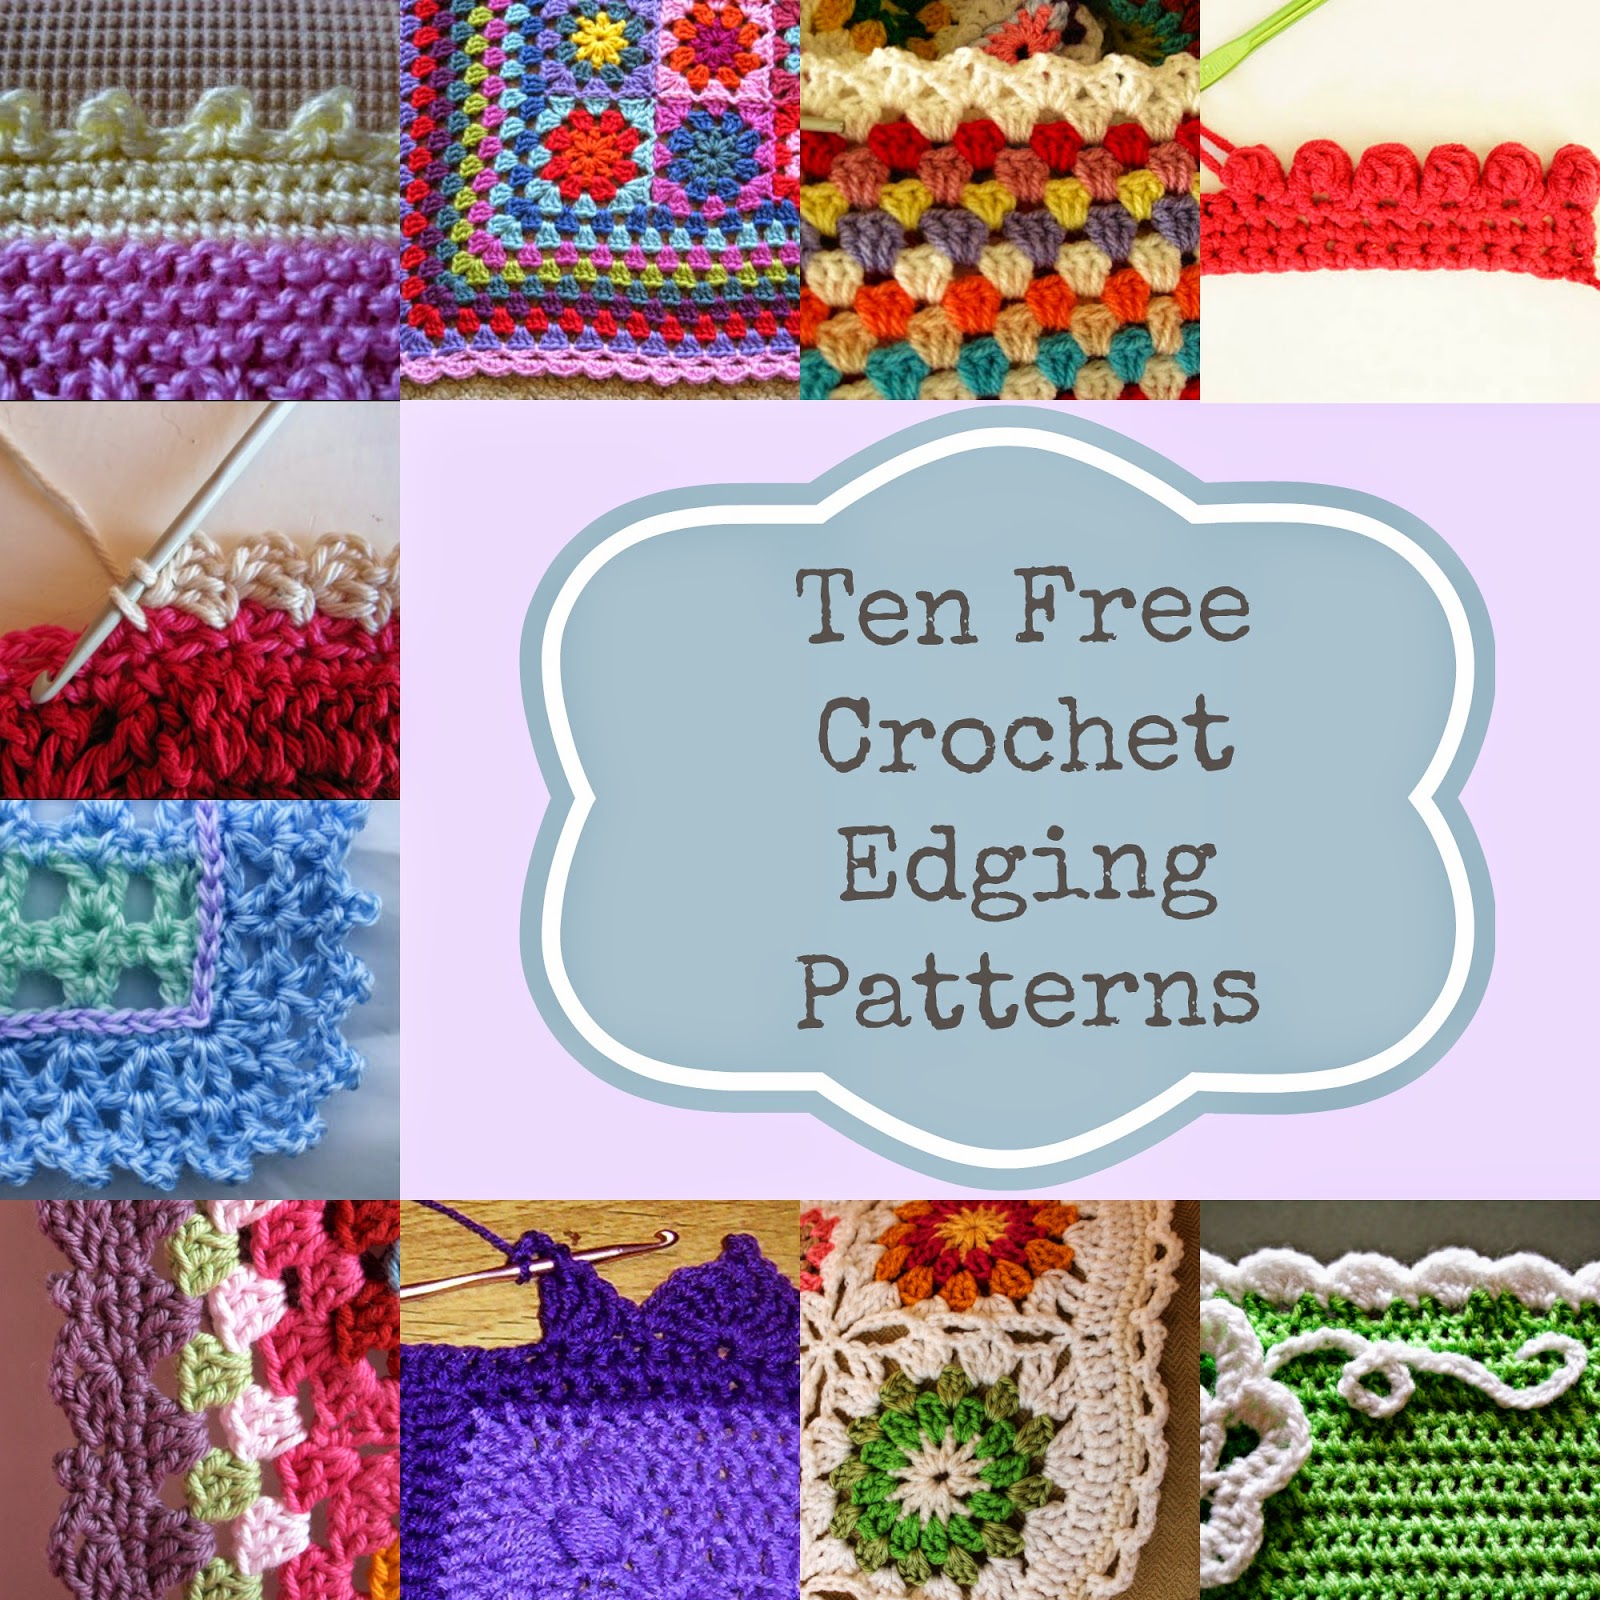 Crochet Trim Patterns Knot Your Nanas Crochet 10 Ways To Get The Perfect Finish On Your